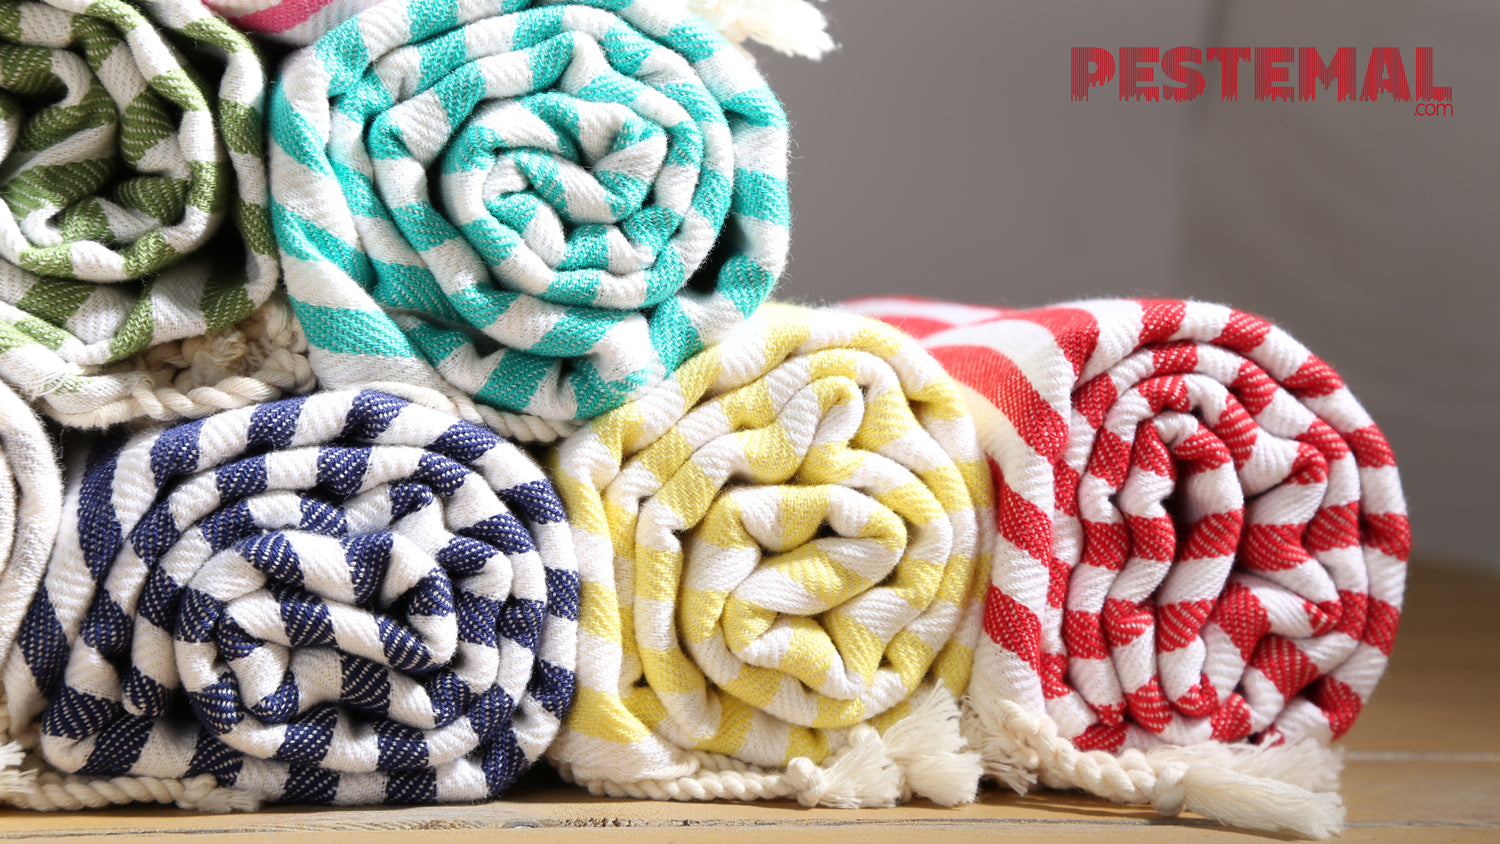 What are the advantages of owning a Pestemal towel?